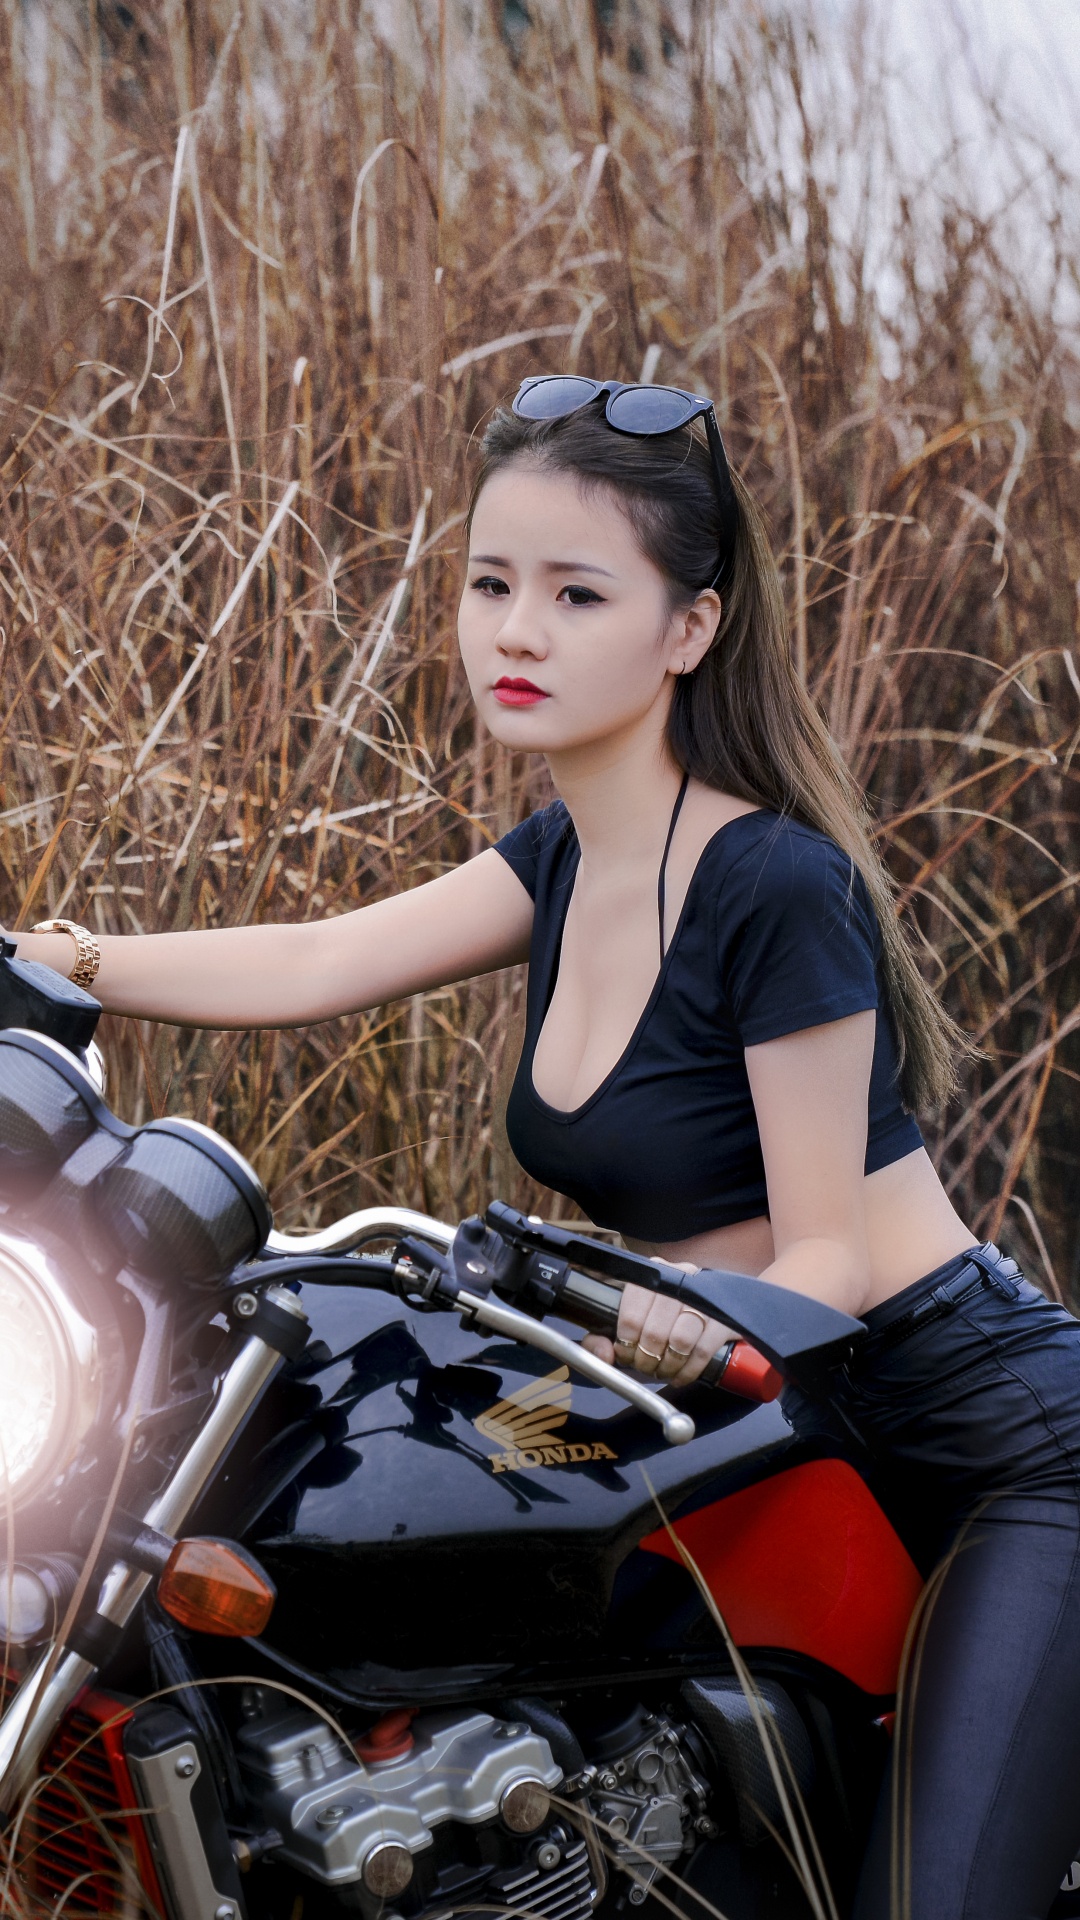 Woman in Black Tank Top and Black Leggings Sitting on Red and Black Motorcycle. Wallpaper in 1080x1920 Resolution